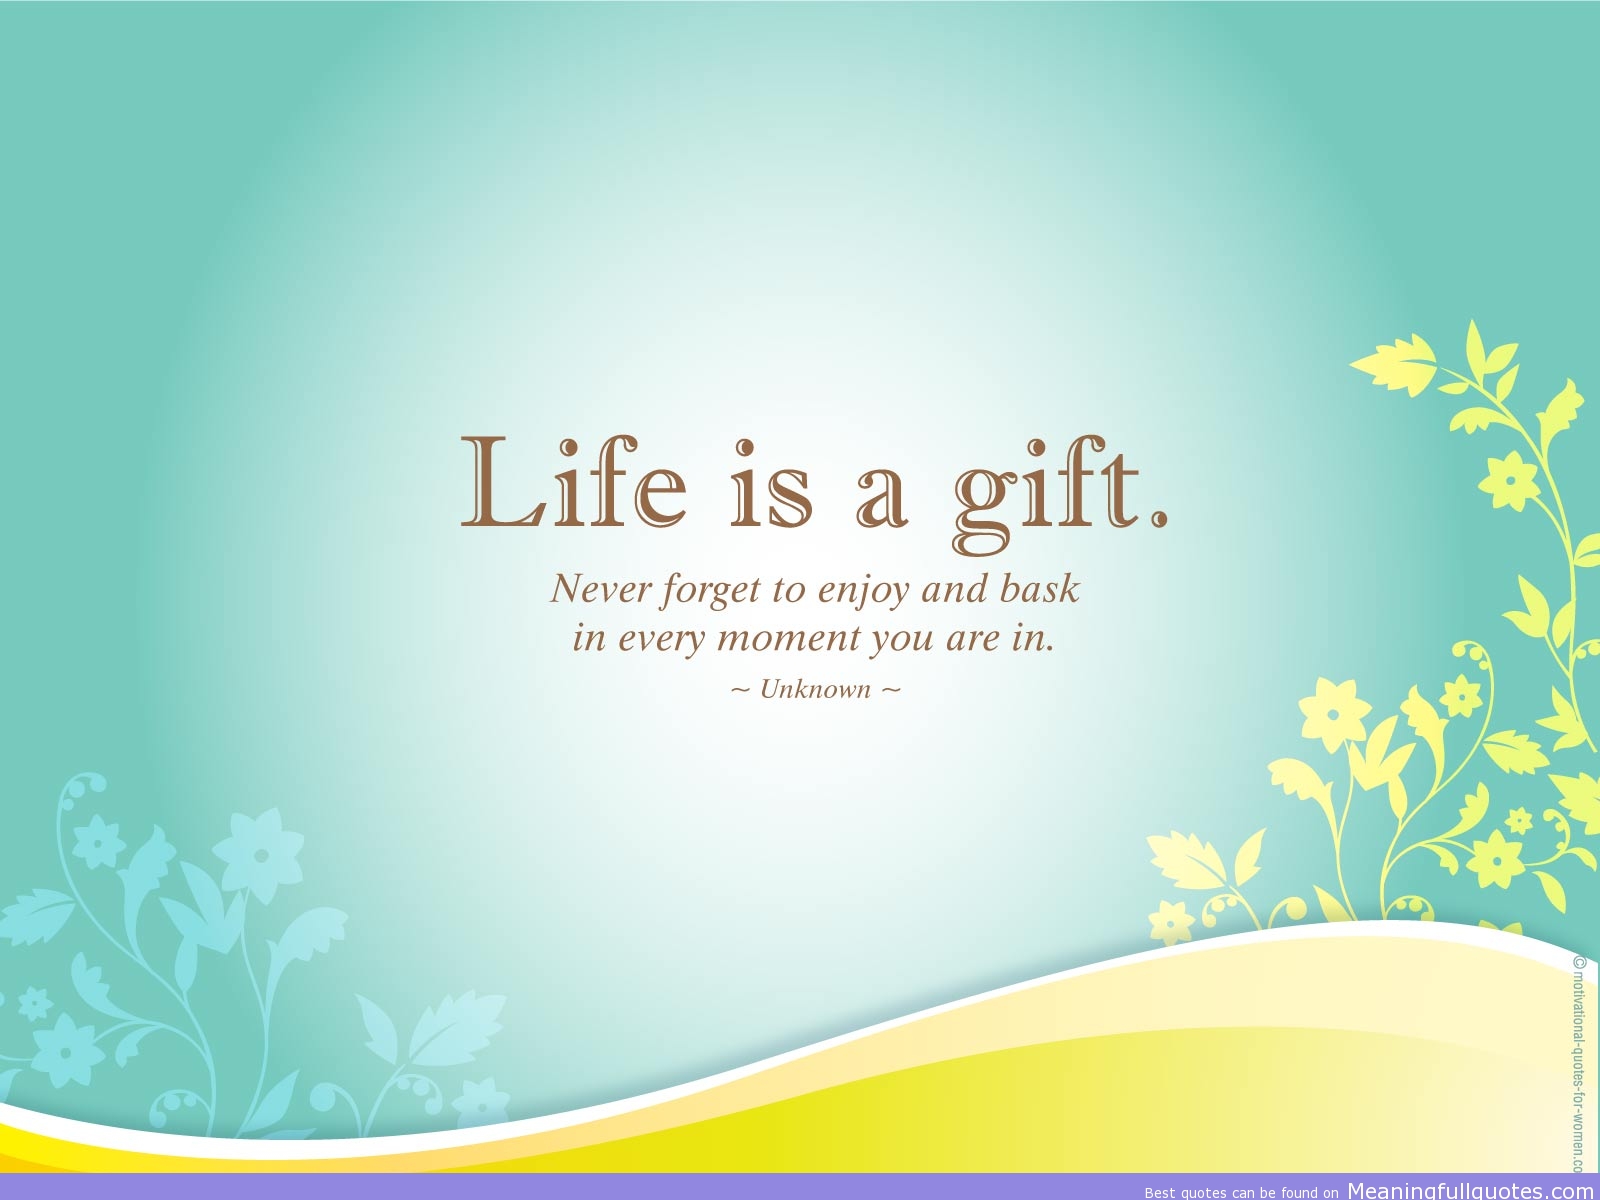 inspirational-life-quotes-life-is-a-gift.jpg